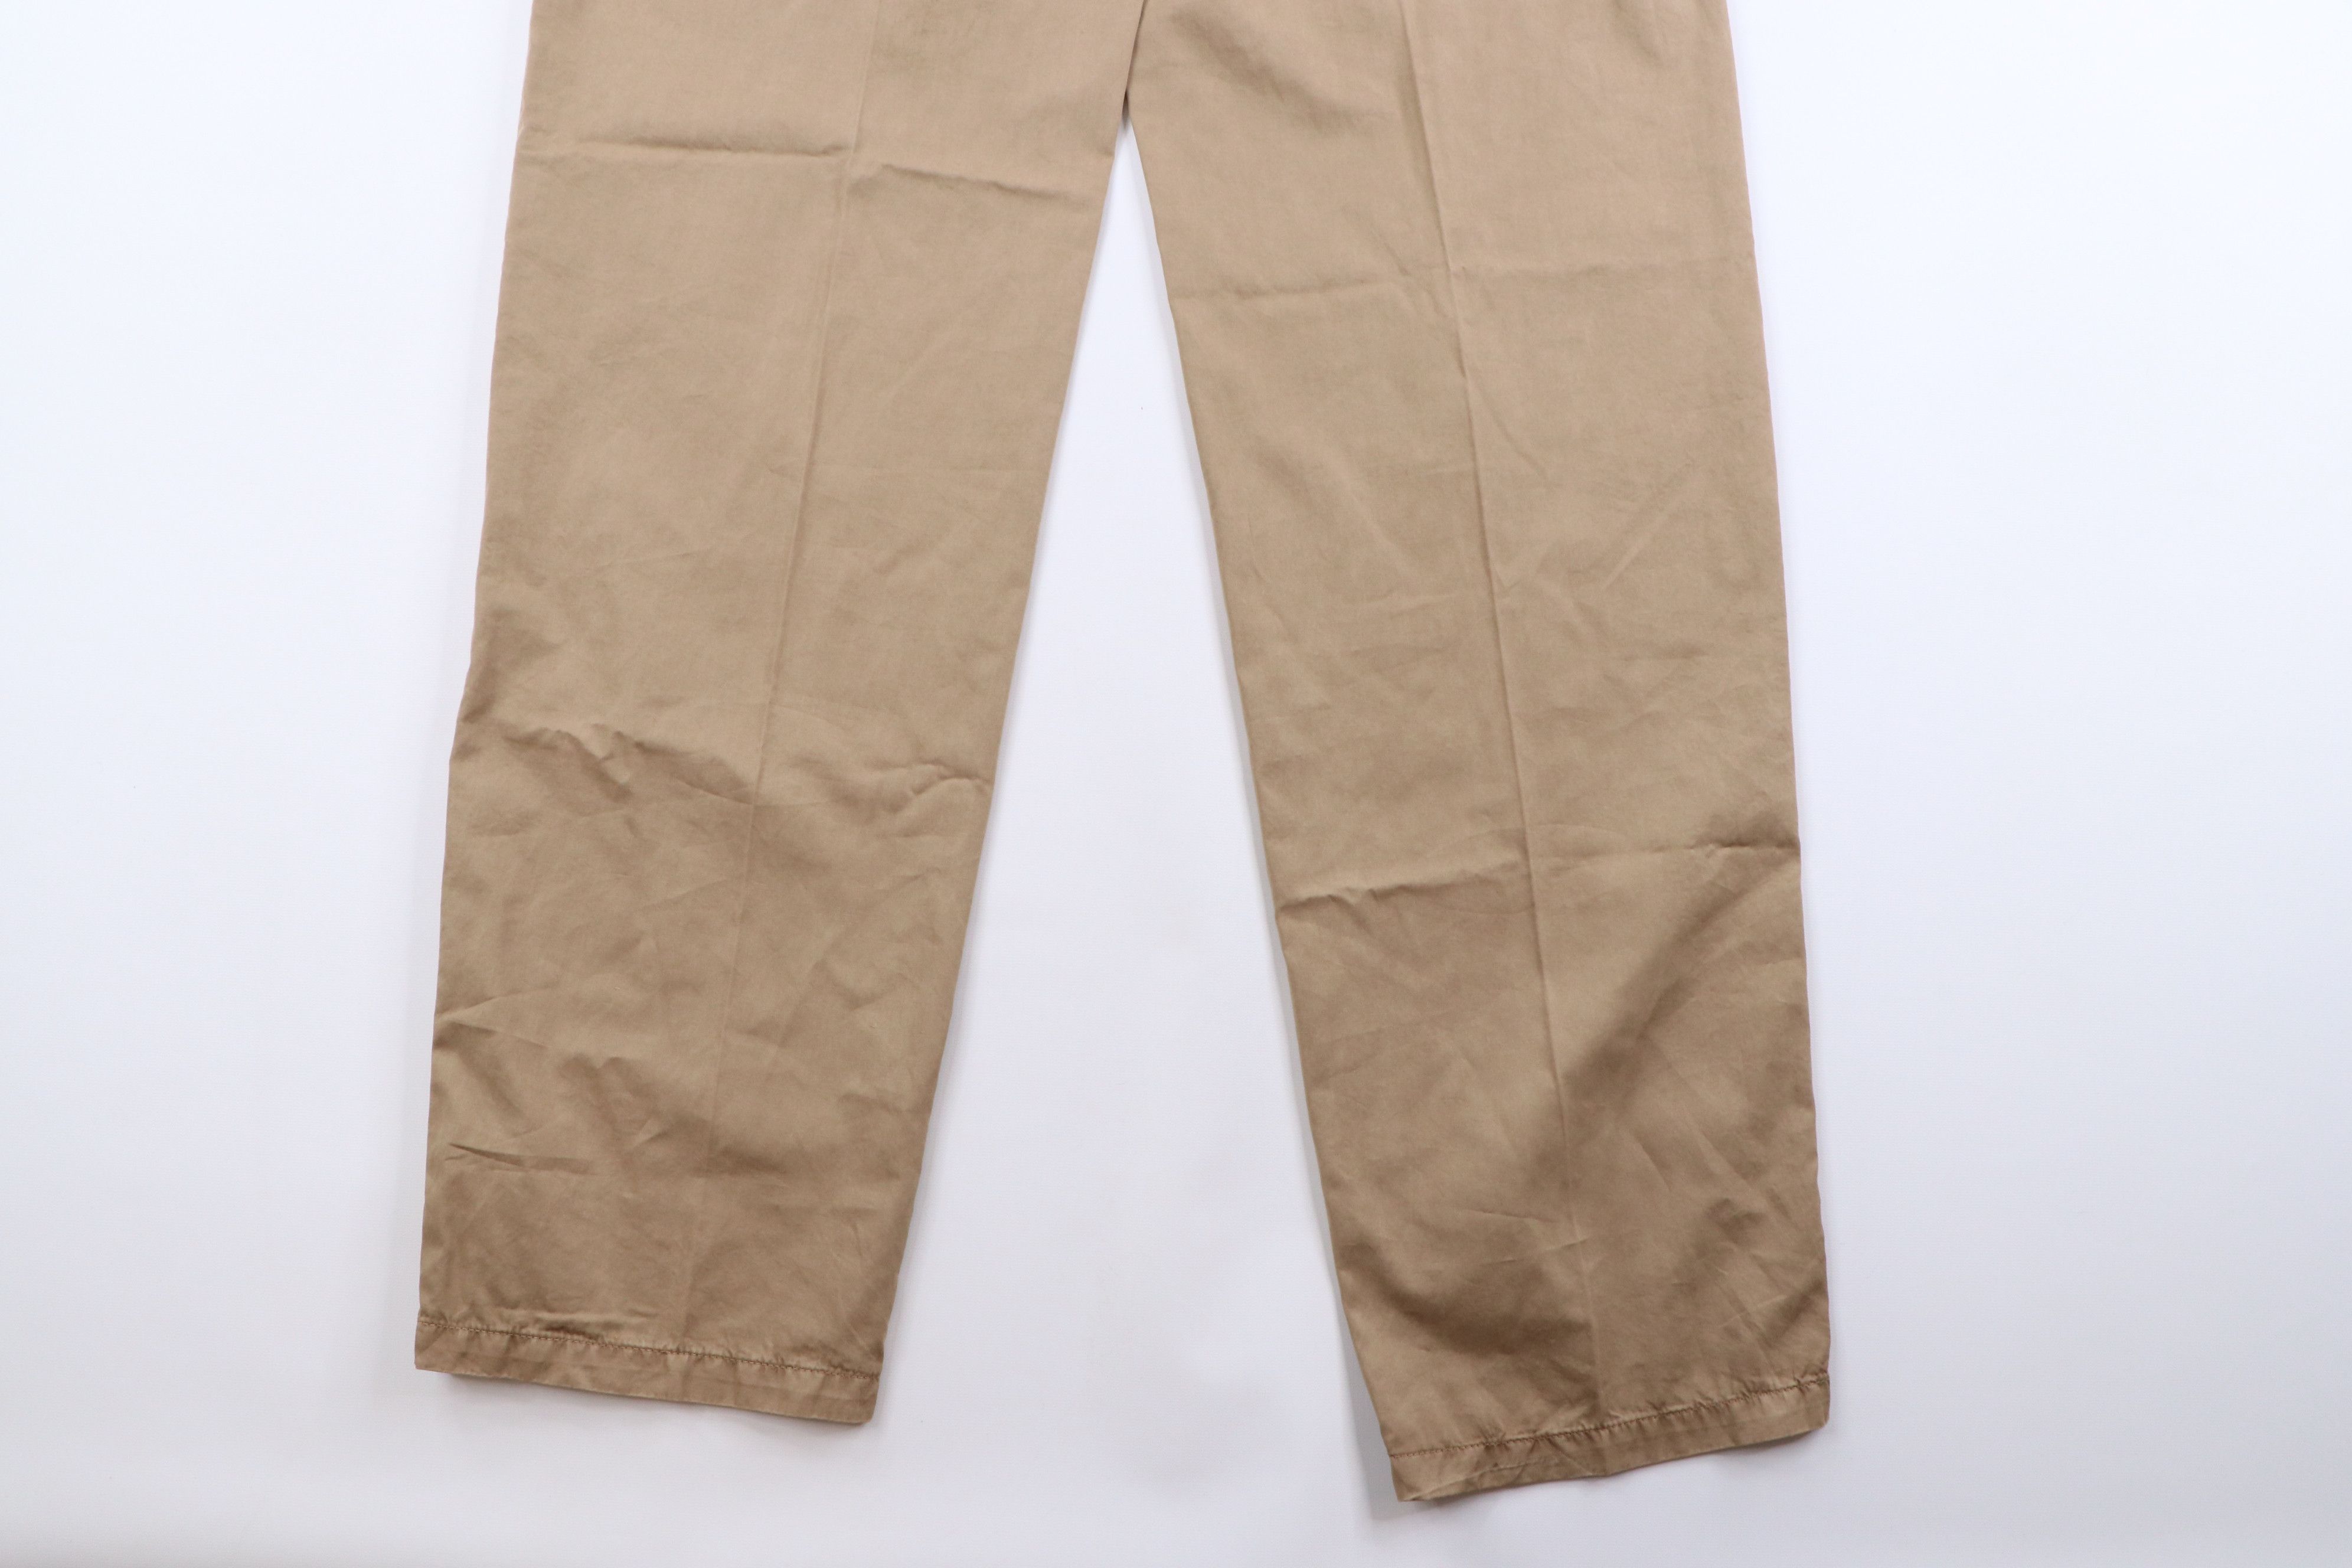 Vintage Paul & Shark Stonewash Pleated Flying Chino Pants Cotton Size US 36 / EU 52 - 7 Preview